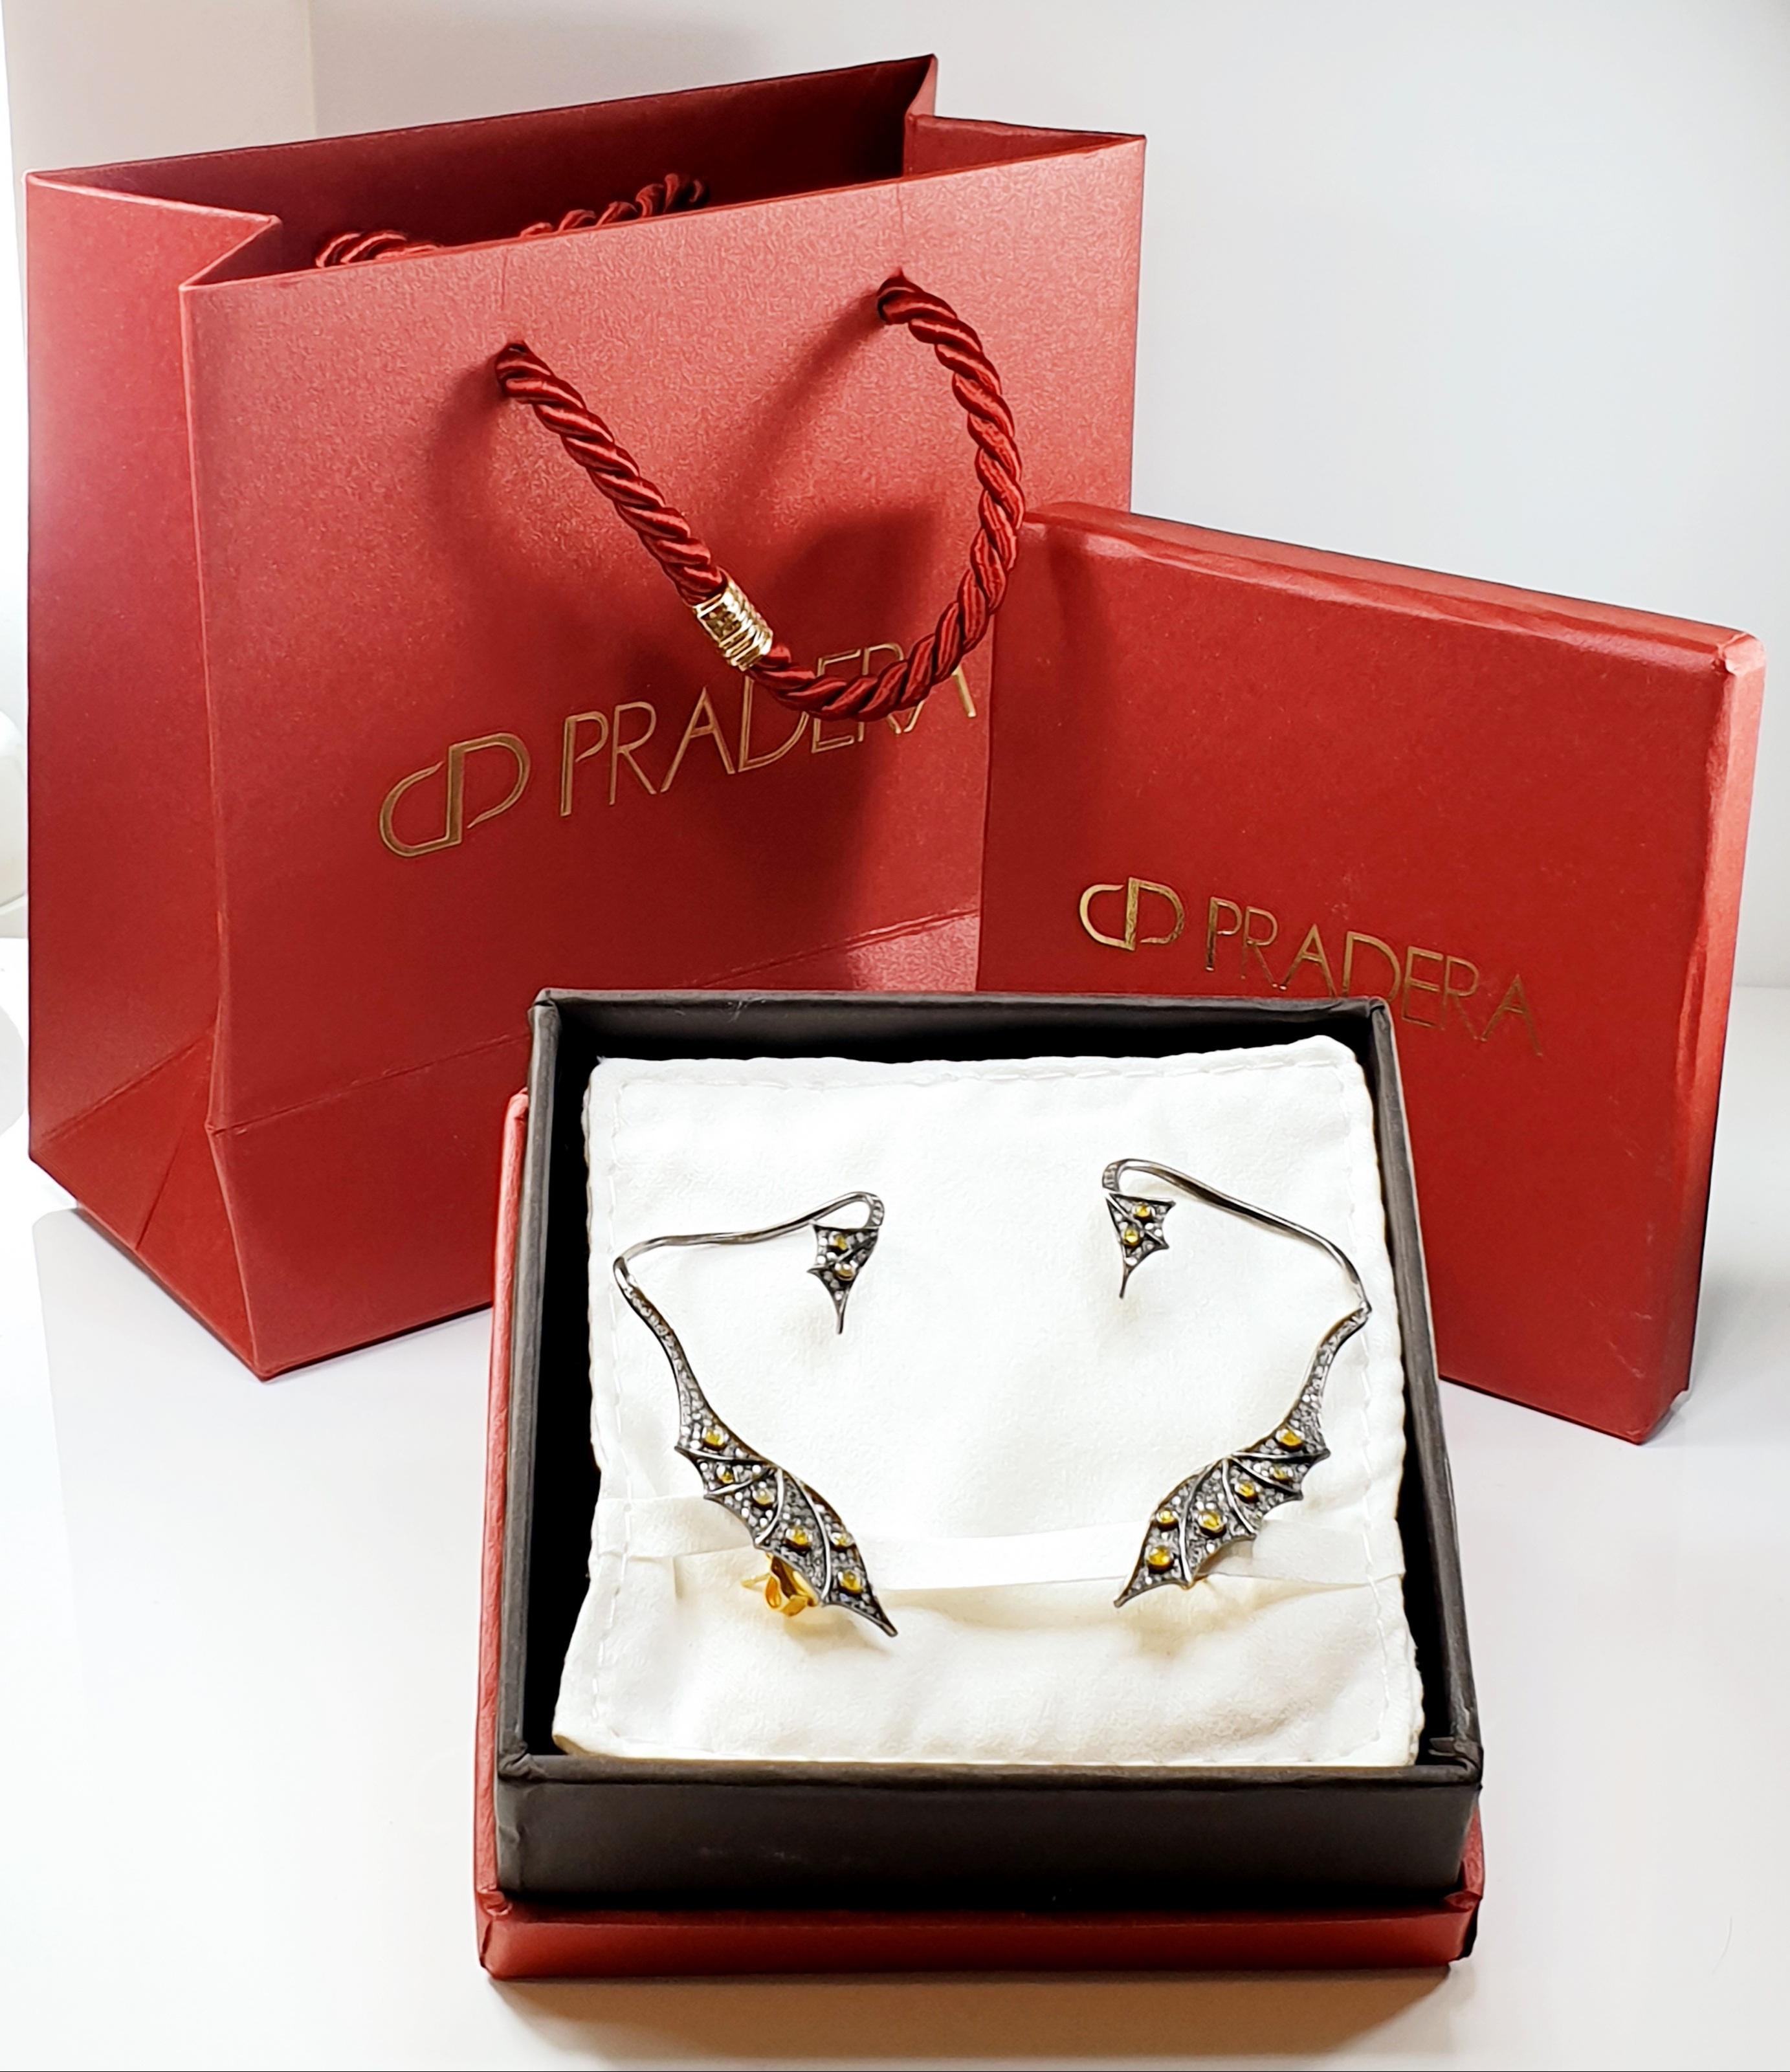 Sophisticated and modern cuff dragon Earrings with diamonds and cabouchon yellow saphires 
Irama Pradera is a Young designer from Spain that searches always for the best gems and combines classic with contemporary mounting and styles. 
Sleekly